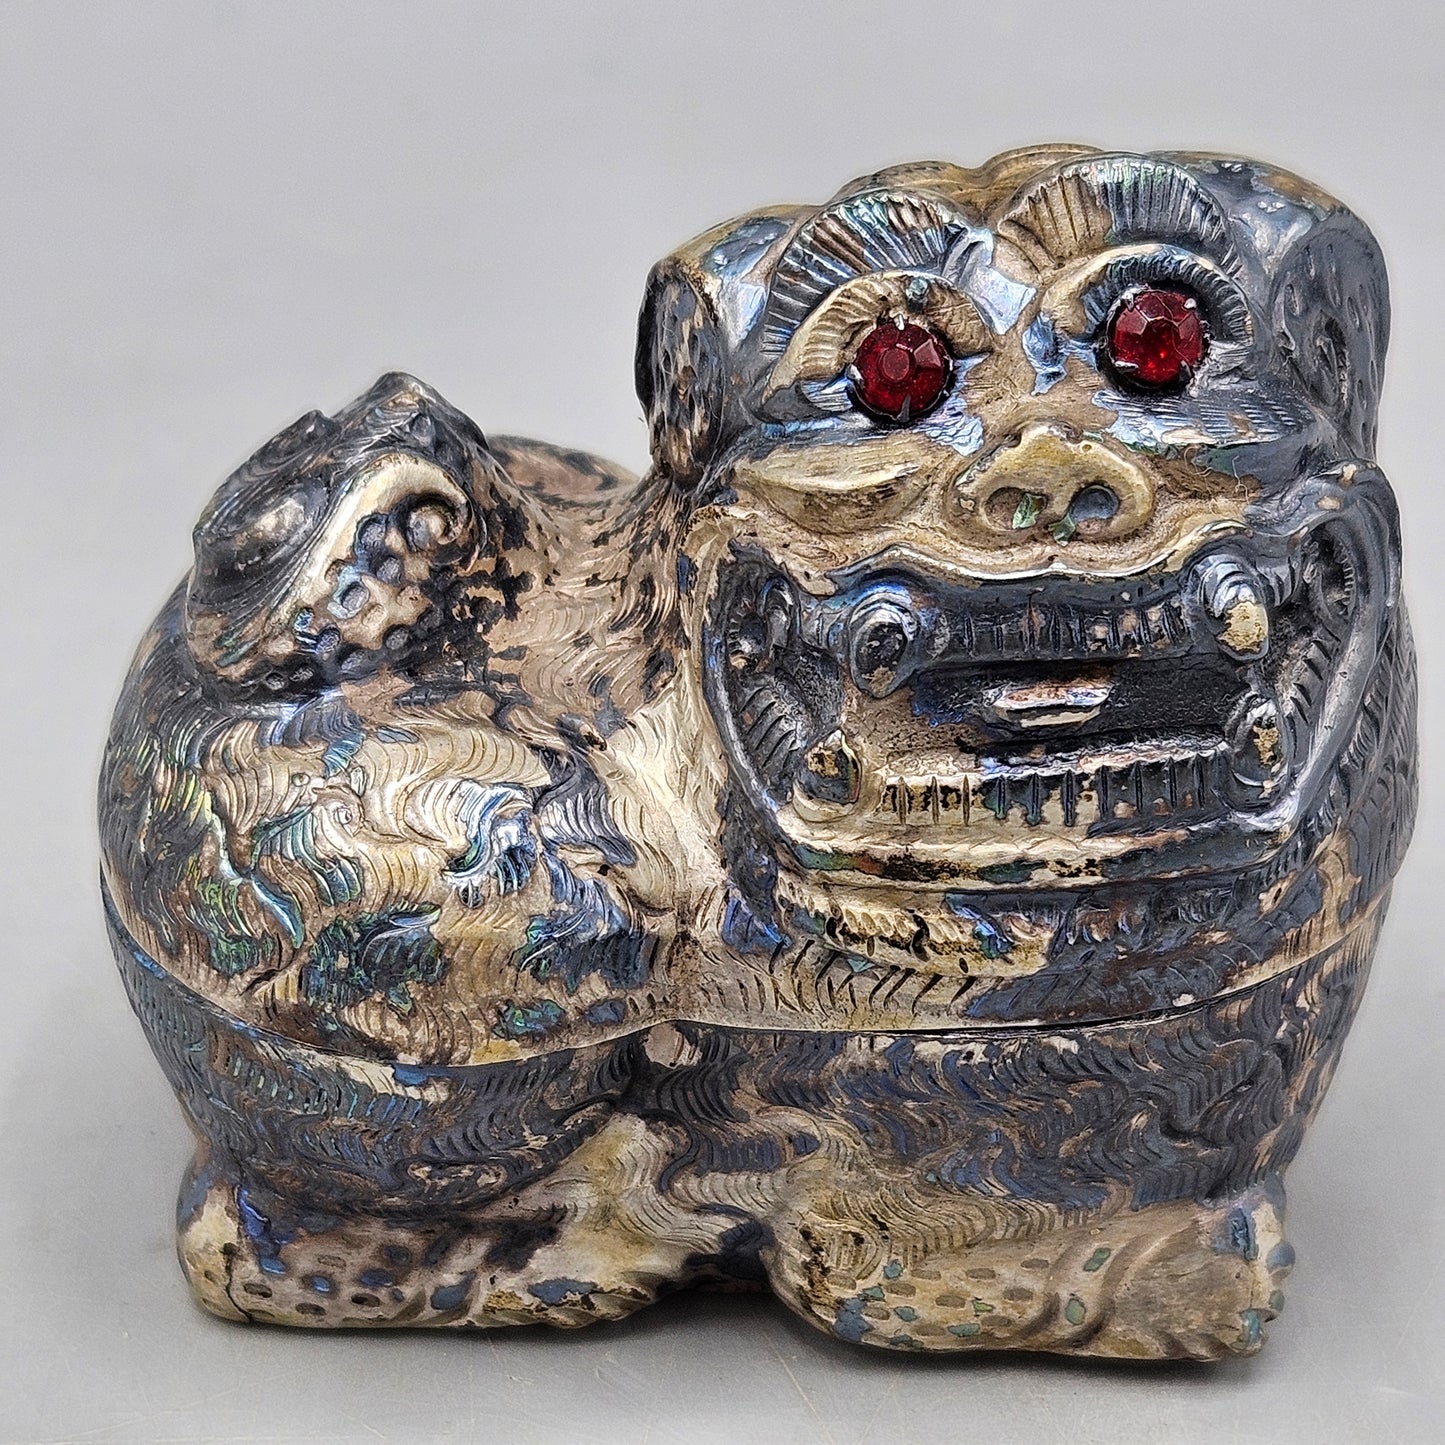 Vintage Chased Silver Lion-Shaped Betel Box with Red Glass Eyes from Cambodia